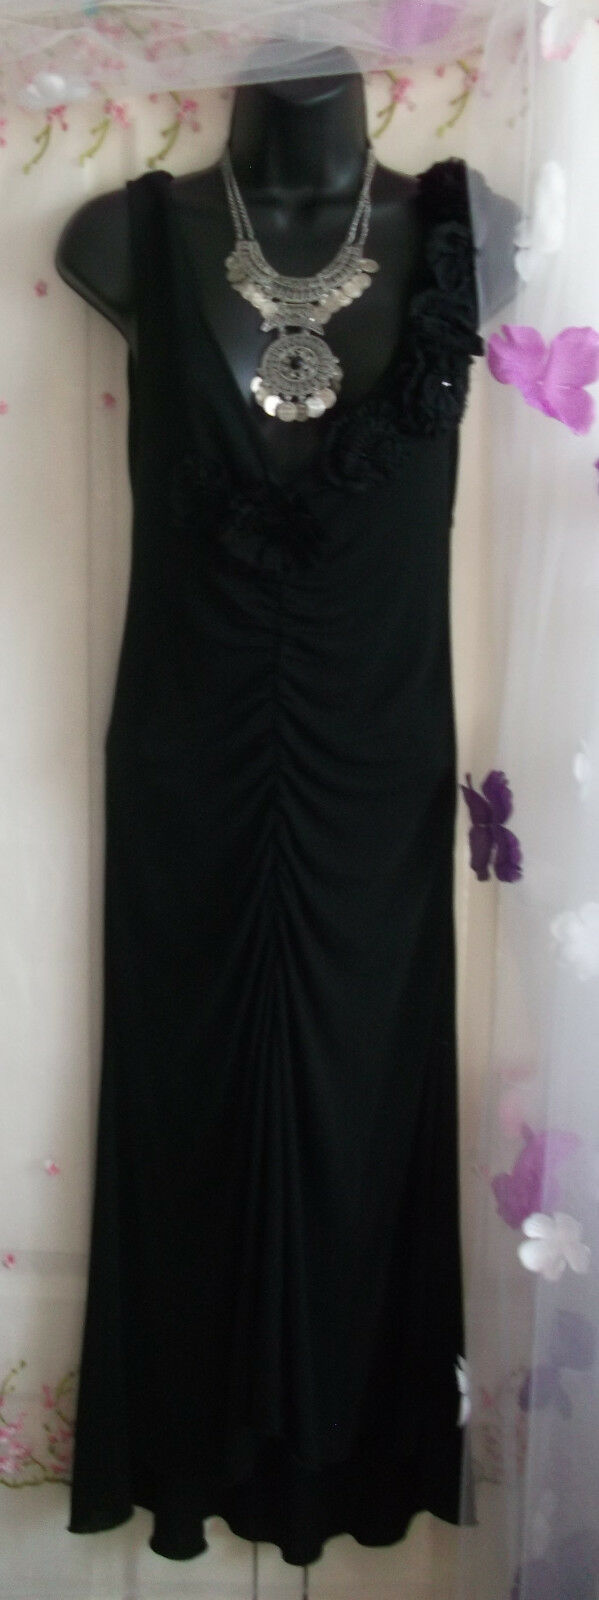 Gorgeous Black Dress By Moschino Cheap and Chic size 10, rose ruffle detail/plun Moschino